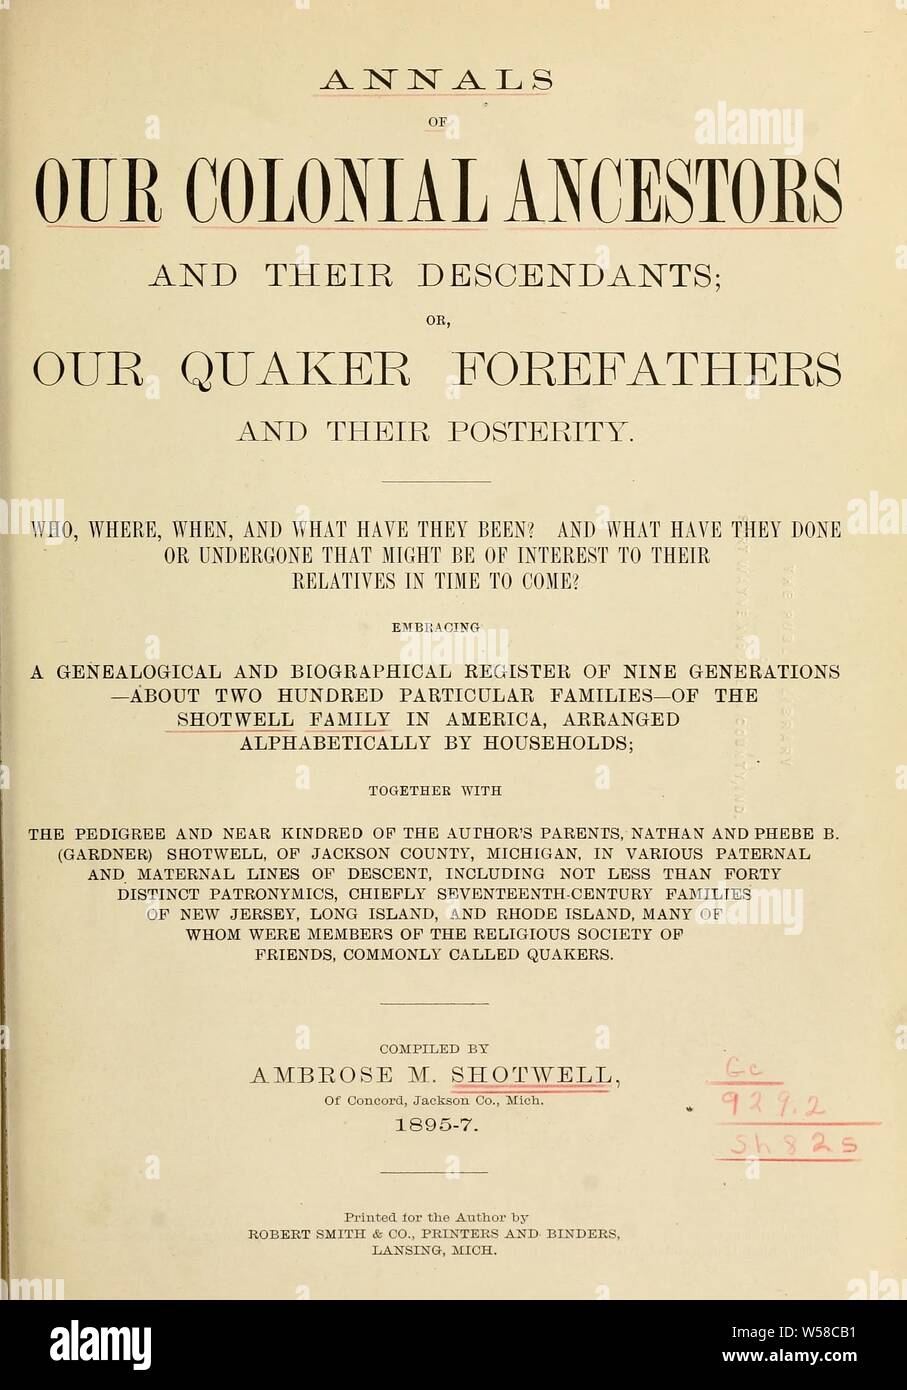 Annals of our colonial ancestors and their descendants, or, our Quaker forefathers and their posterity embracing a genealogical and biographical register of nine generations of the Shotwell family in America, together with the pedigree and near kindred of the author's parents, Nathan and Phebe B. (Gardner) Shotwell : Shotwell, Ambrose Milton, 1853 Stock Photo